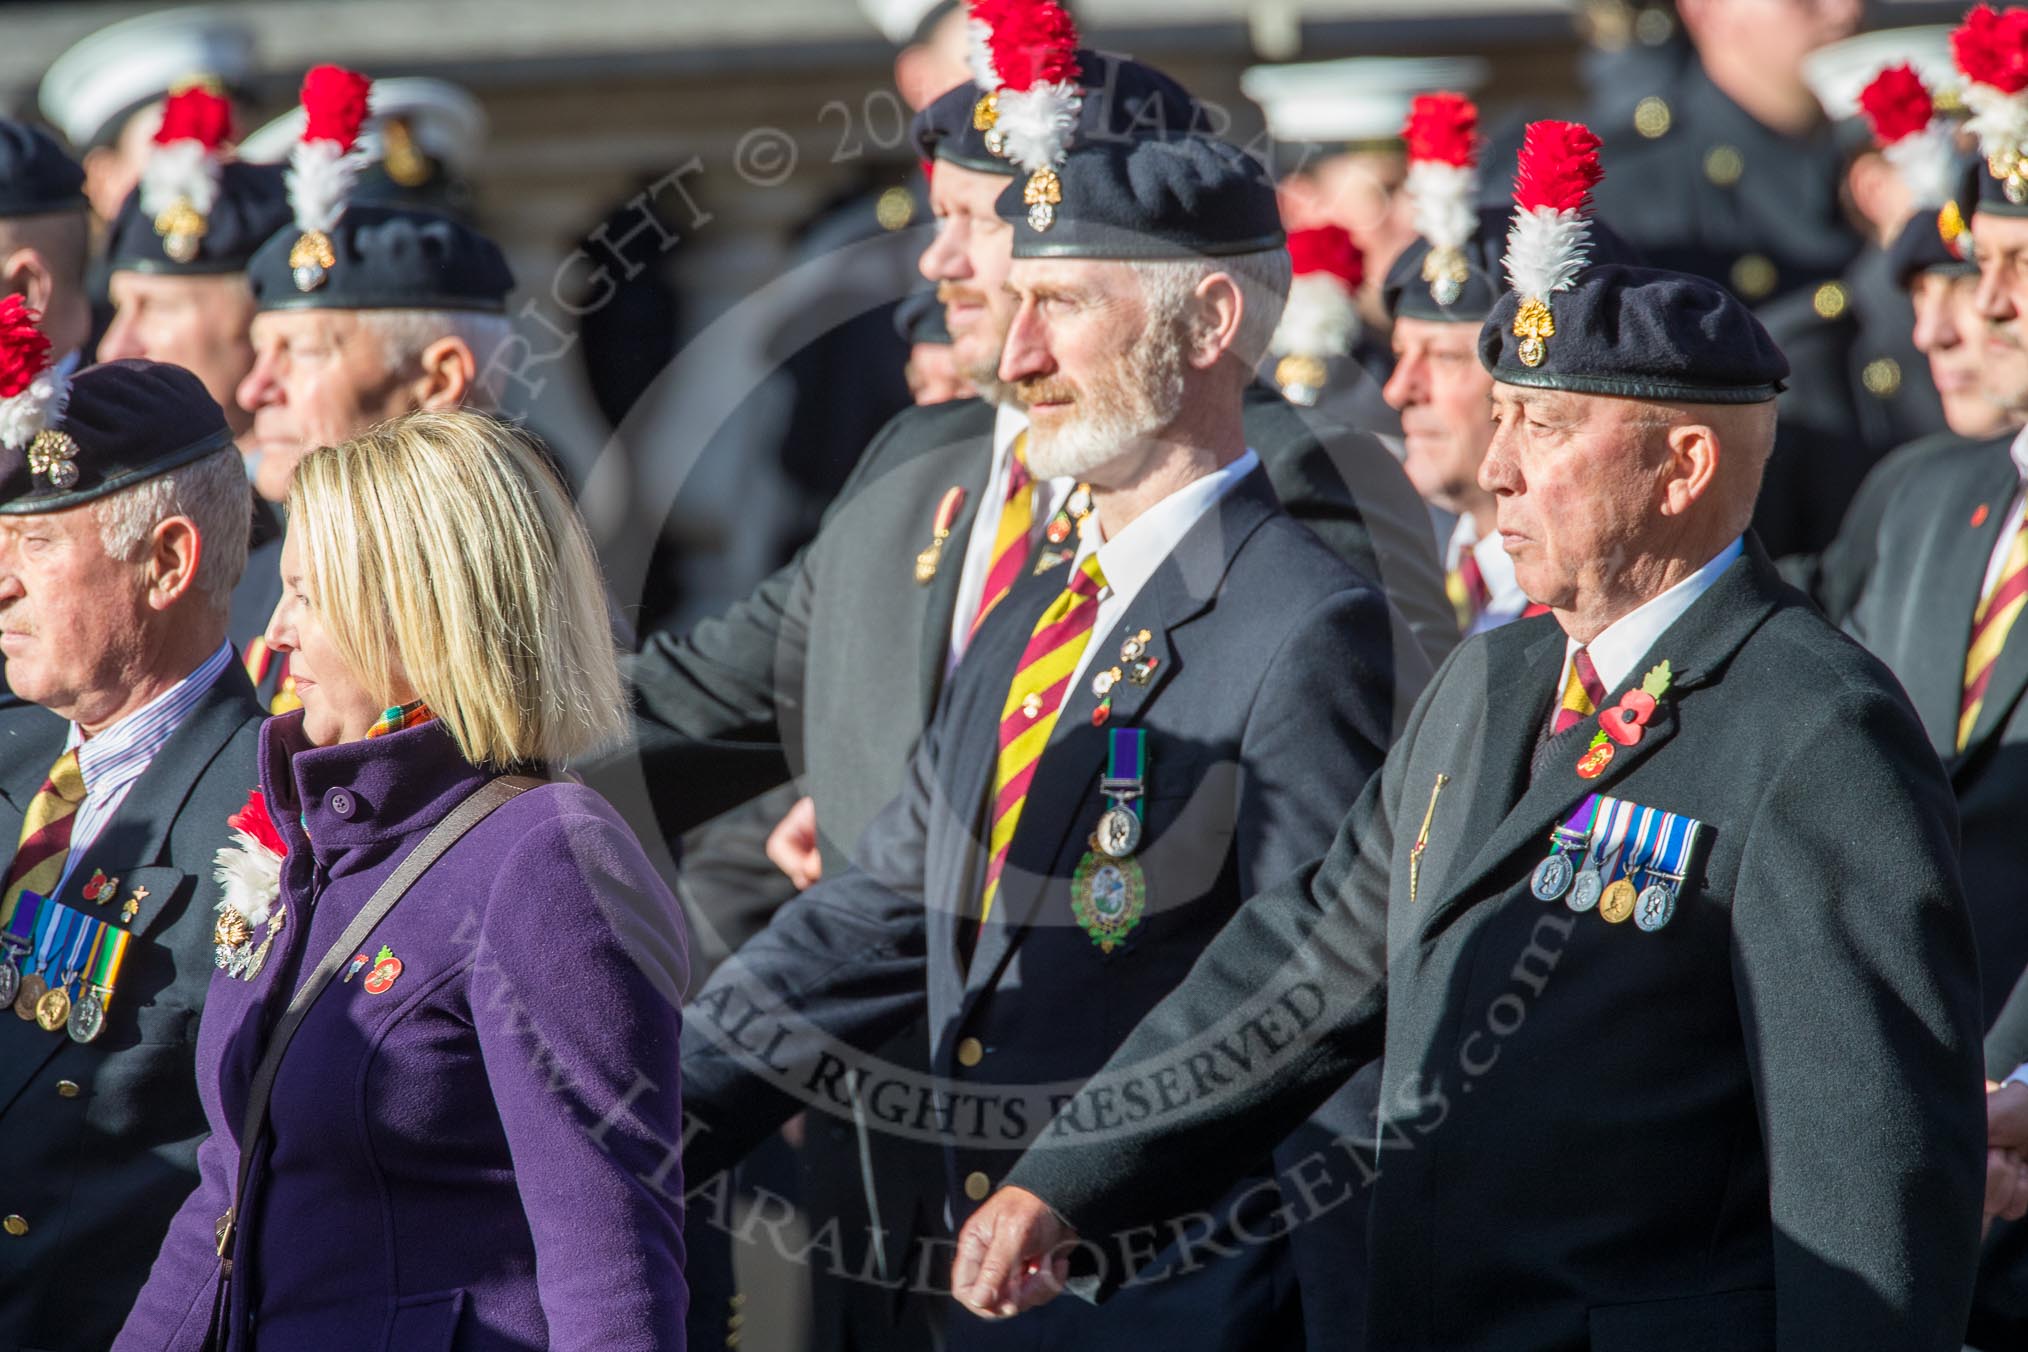 Fusiliers Association  Lancashire (Group A35, 34 members) during the Royal British Legion March Past on Remembrance Sunday at the Cenotaph, Whitehall, Westminster, London, 11 November 2018, 12:02.